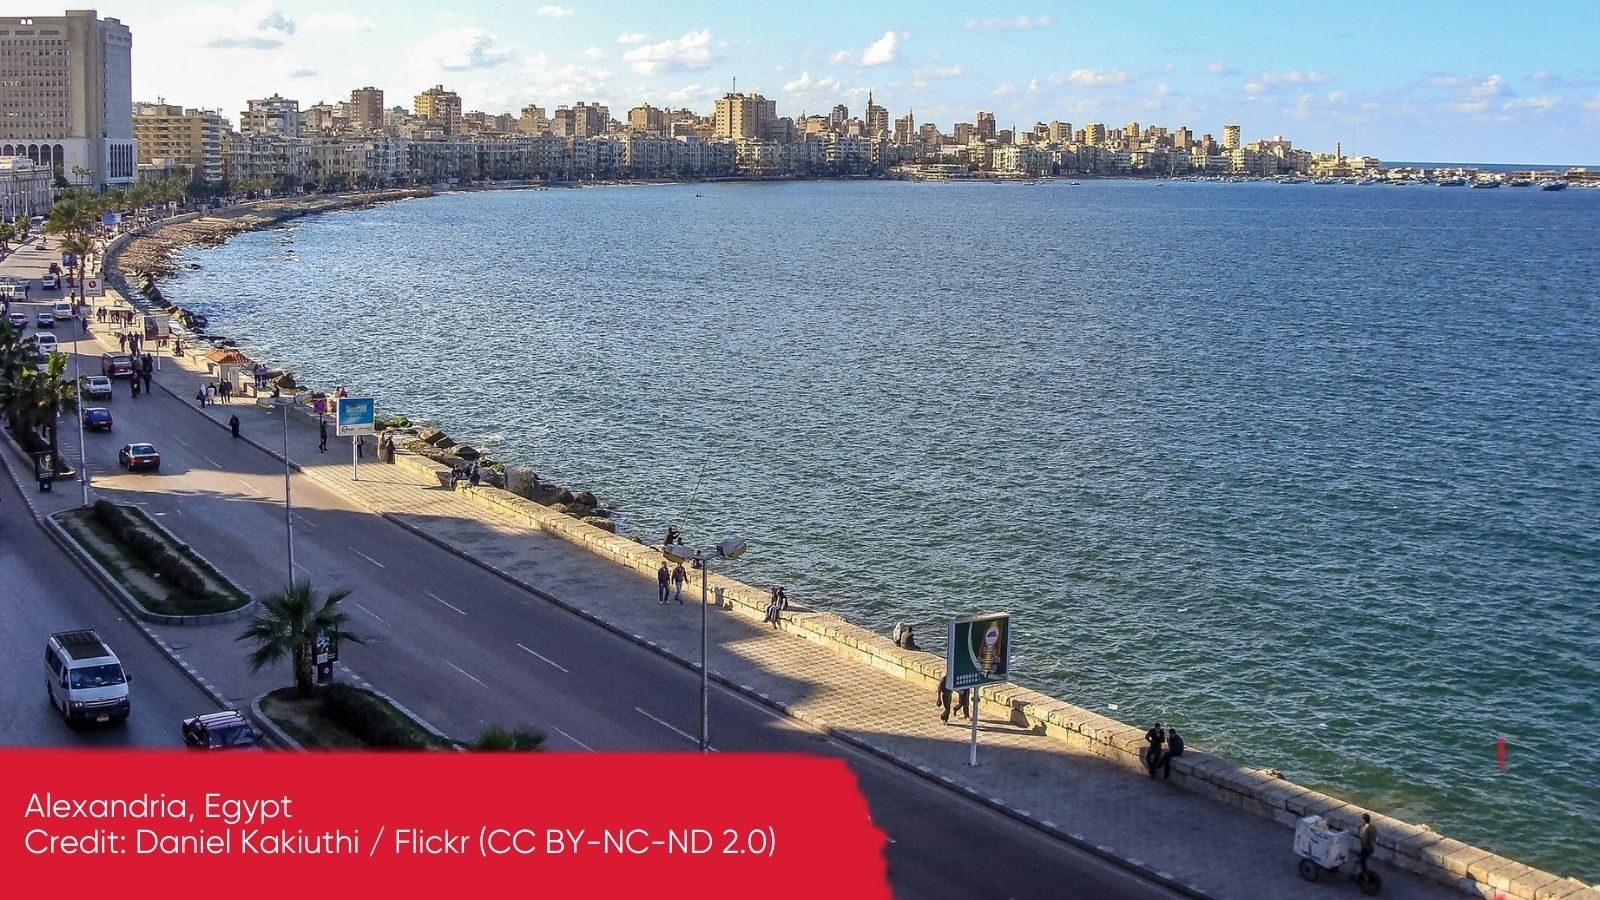 A sweeping view of the city of Alexandria surrounded by sea